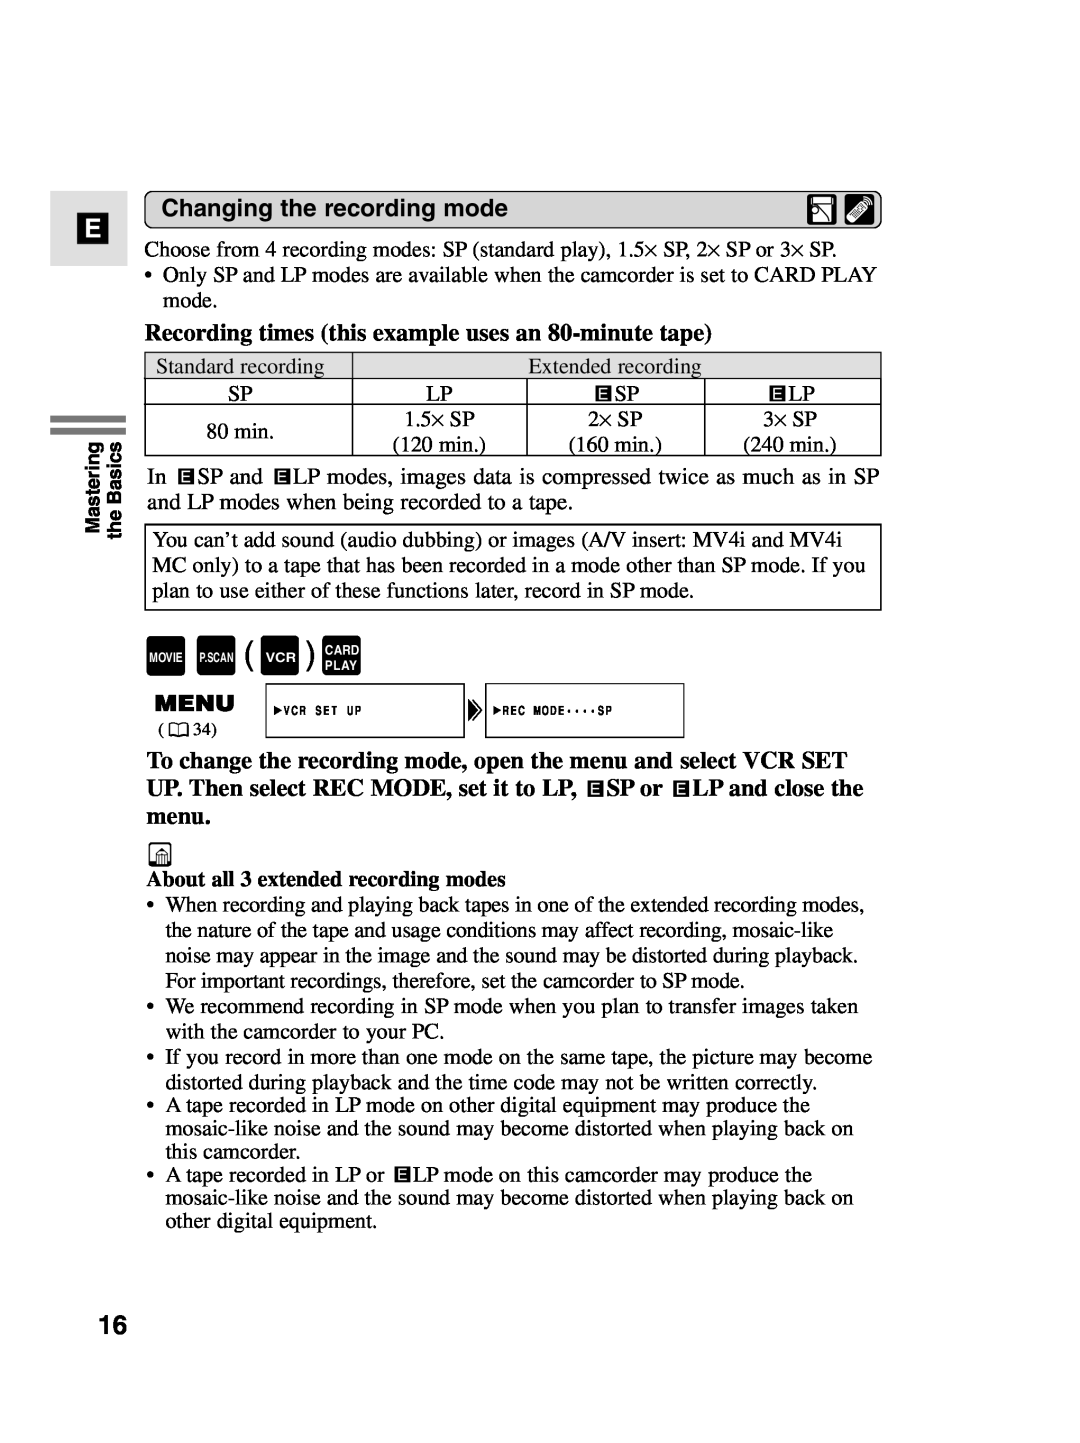 Canon MV4i MC instruction manual Recording times this example uses an 80-minute tape, Changing the recording mode 